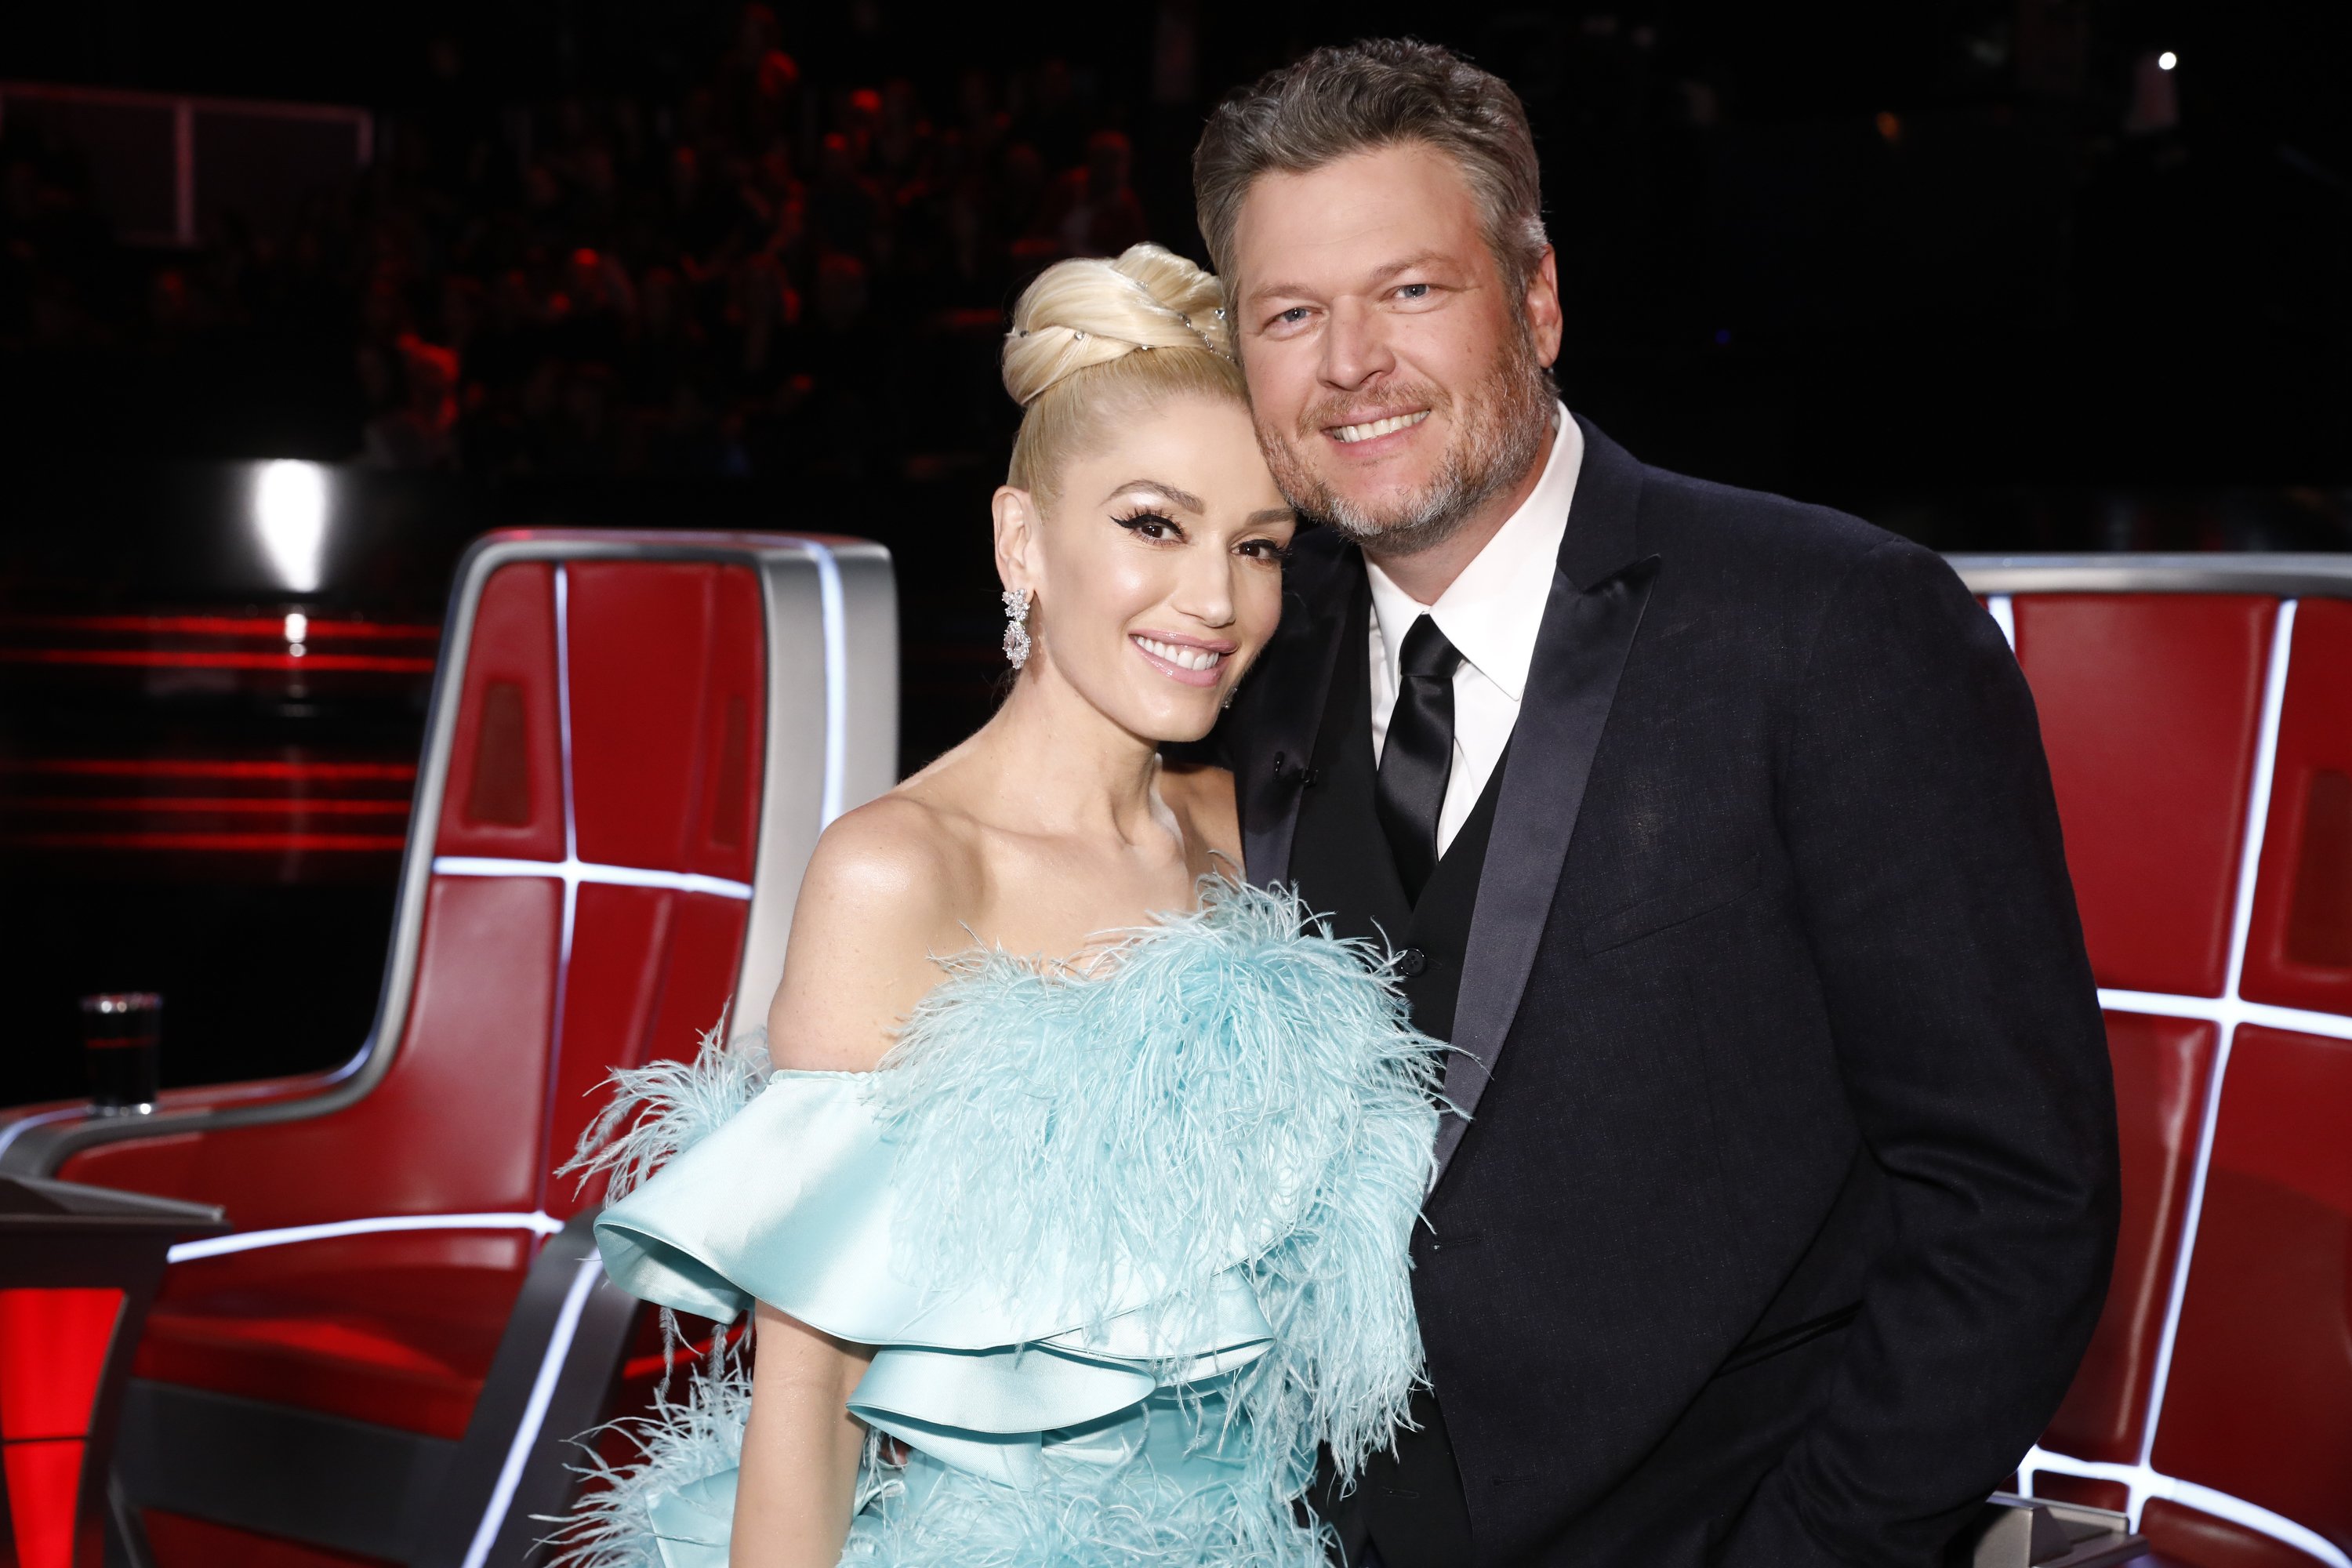 Gwen Stefani and Blake Shelton on "The Voice," 2019 | Source: Getty Images